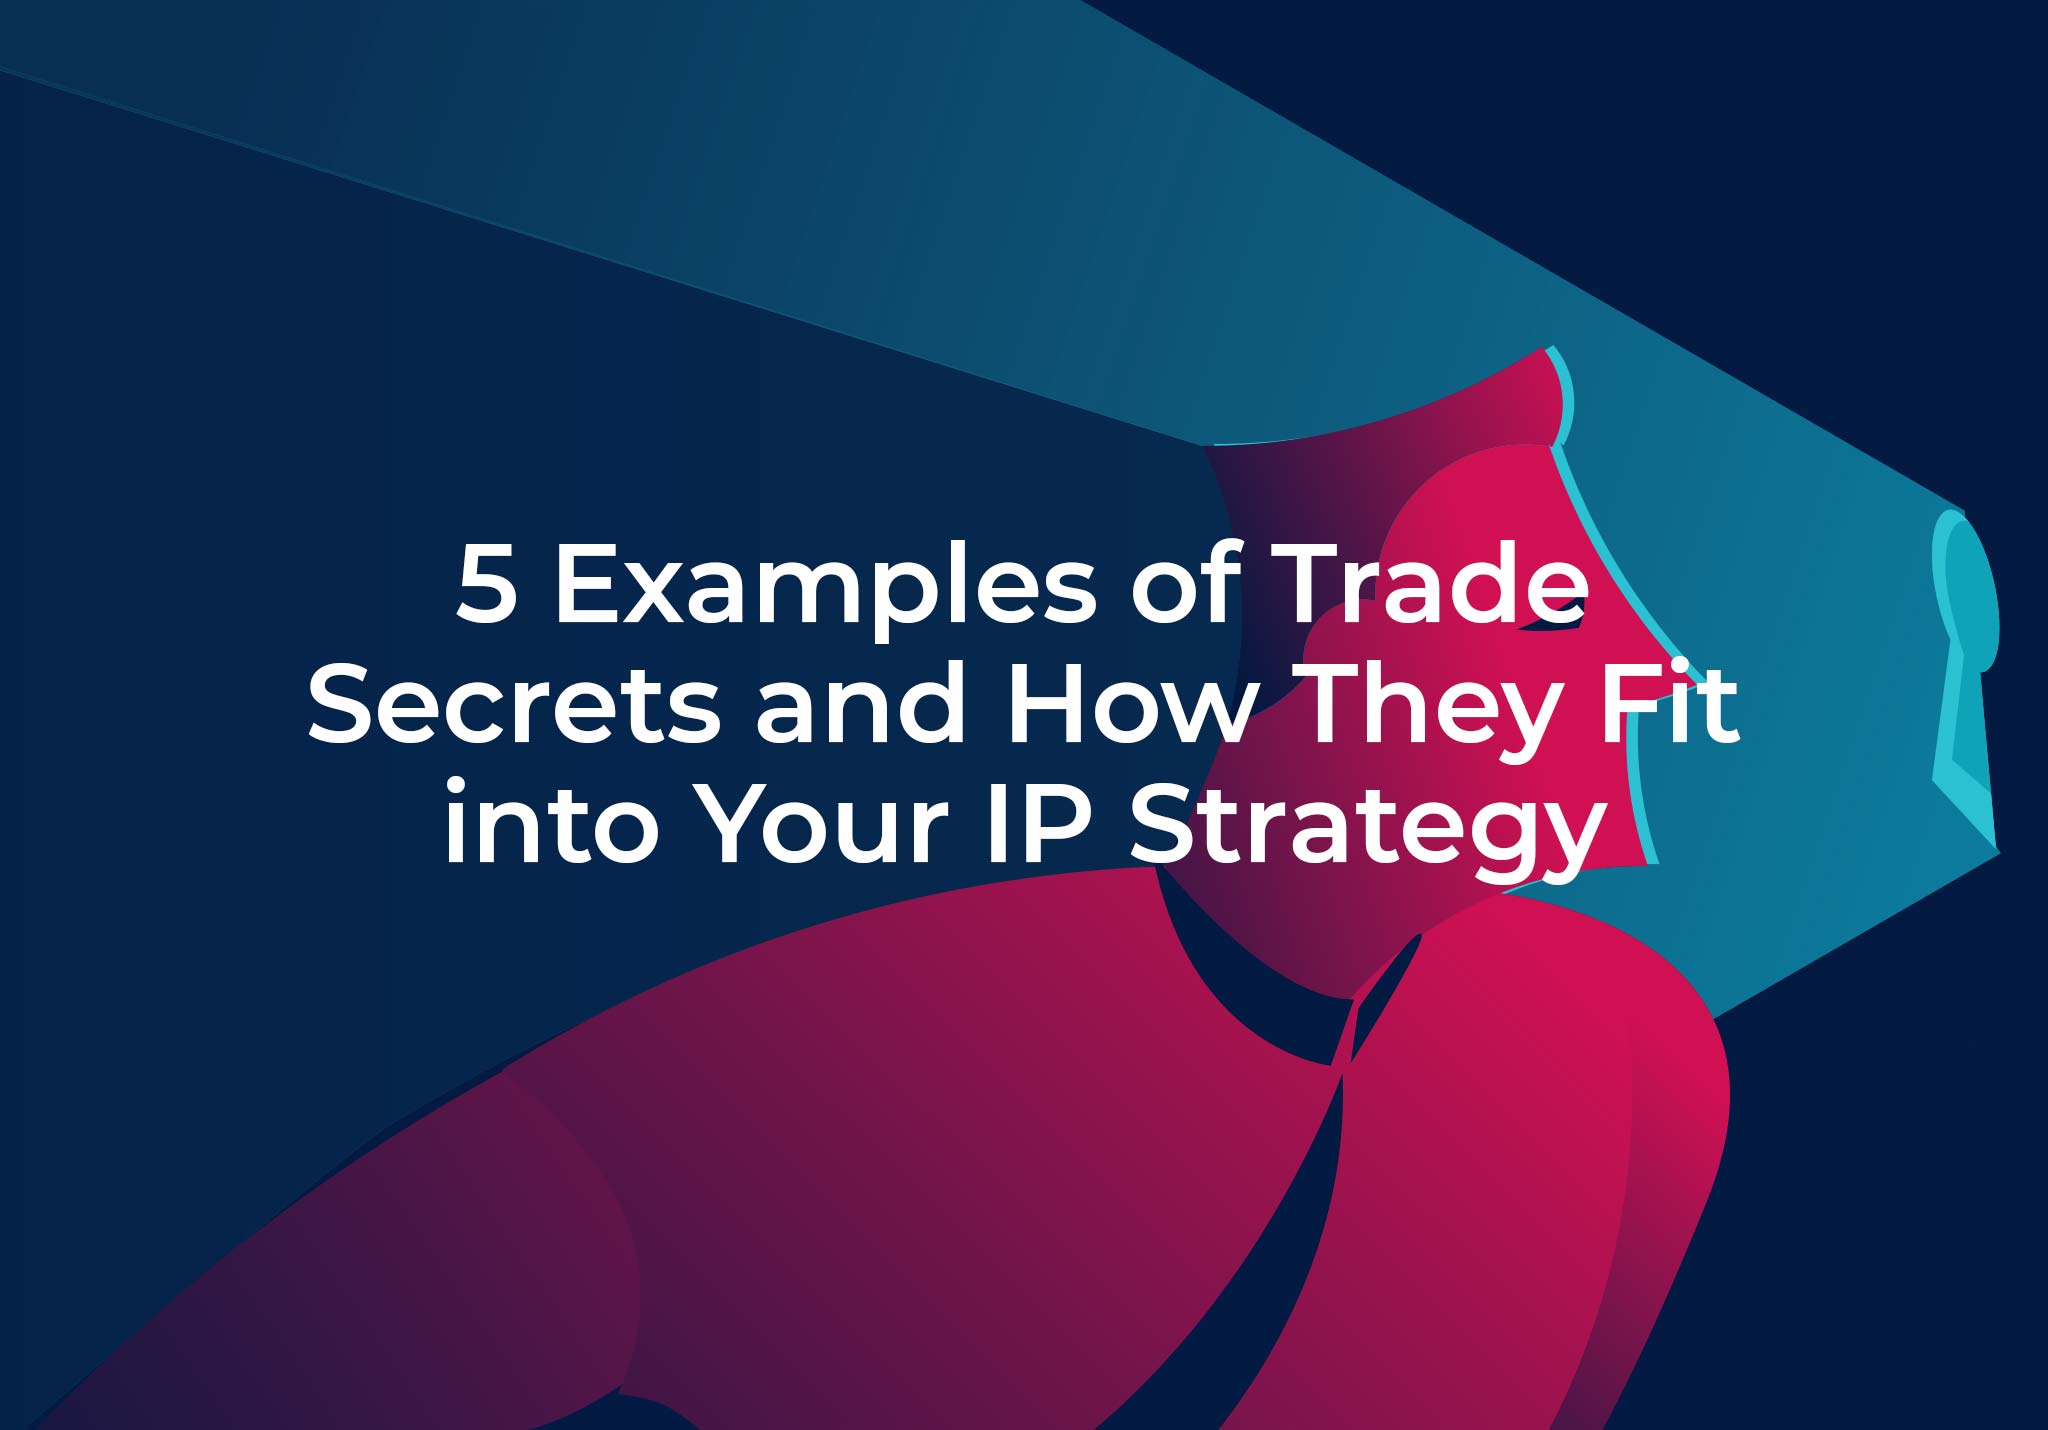 5 Examples of Trade Secrets and How They Fit into Your Intellectual Property Strategy